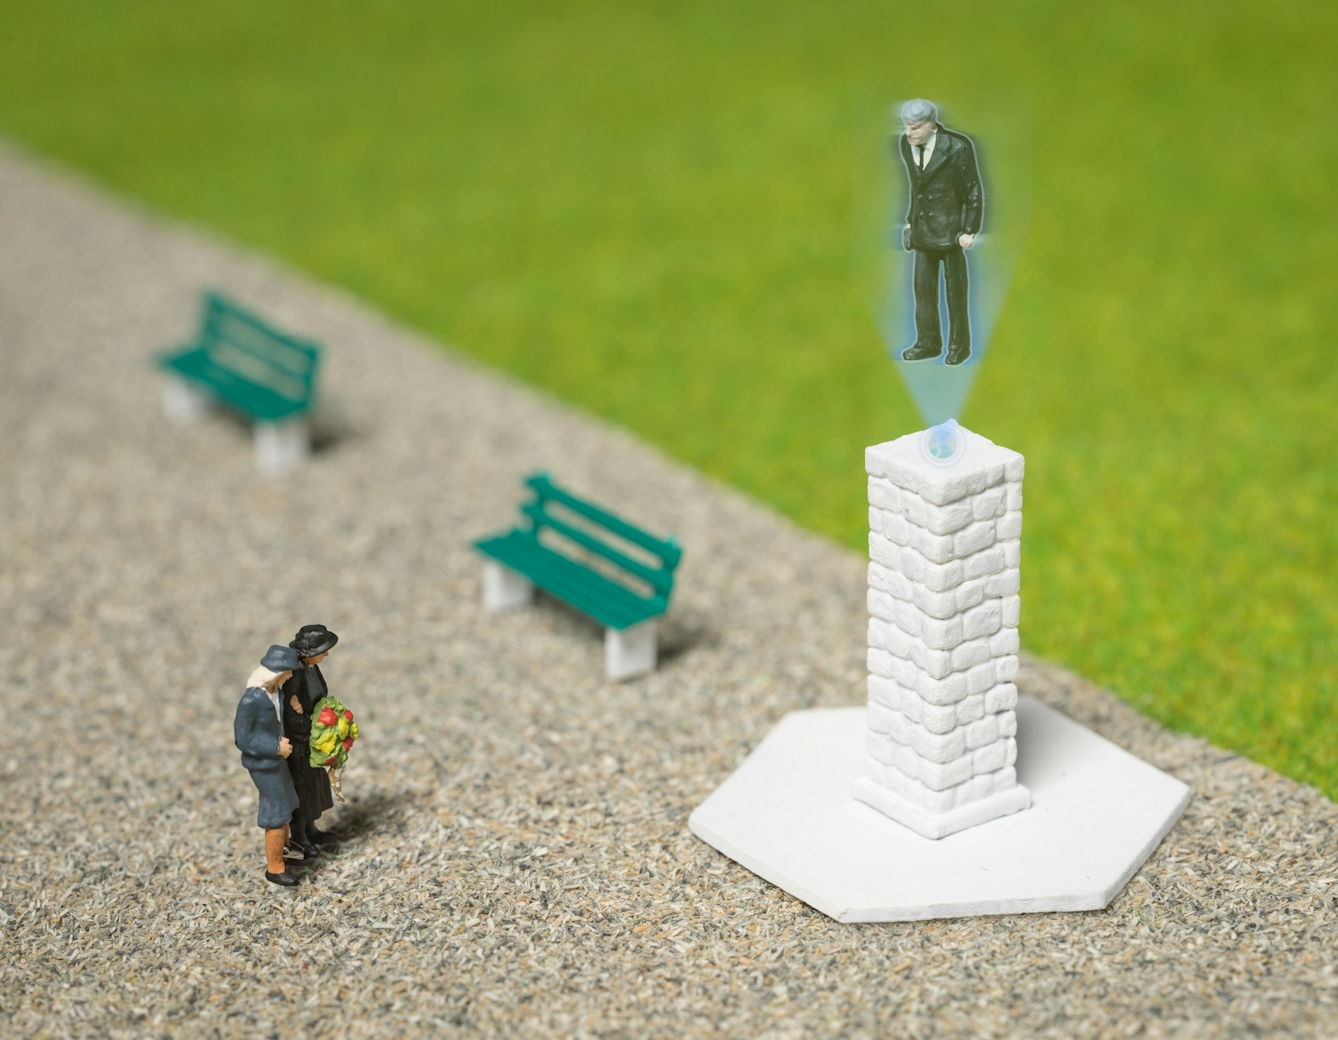 Photograph of model railway scenery depicting a park scene with grass and a wide path. There are two benches and a tall white brick monument. A model of two small figures holding a wreath stand in front of the monument. Out of the top of the monument is a projected holographic image of a man in a suit and tie, looking towards the figures below.